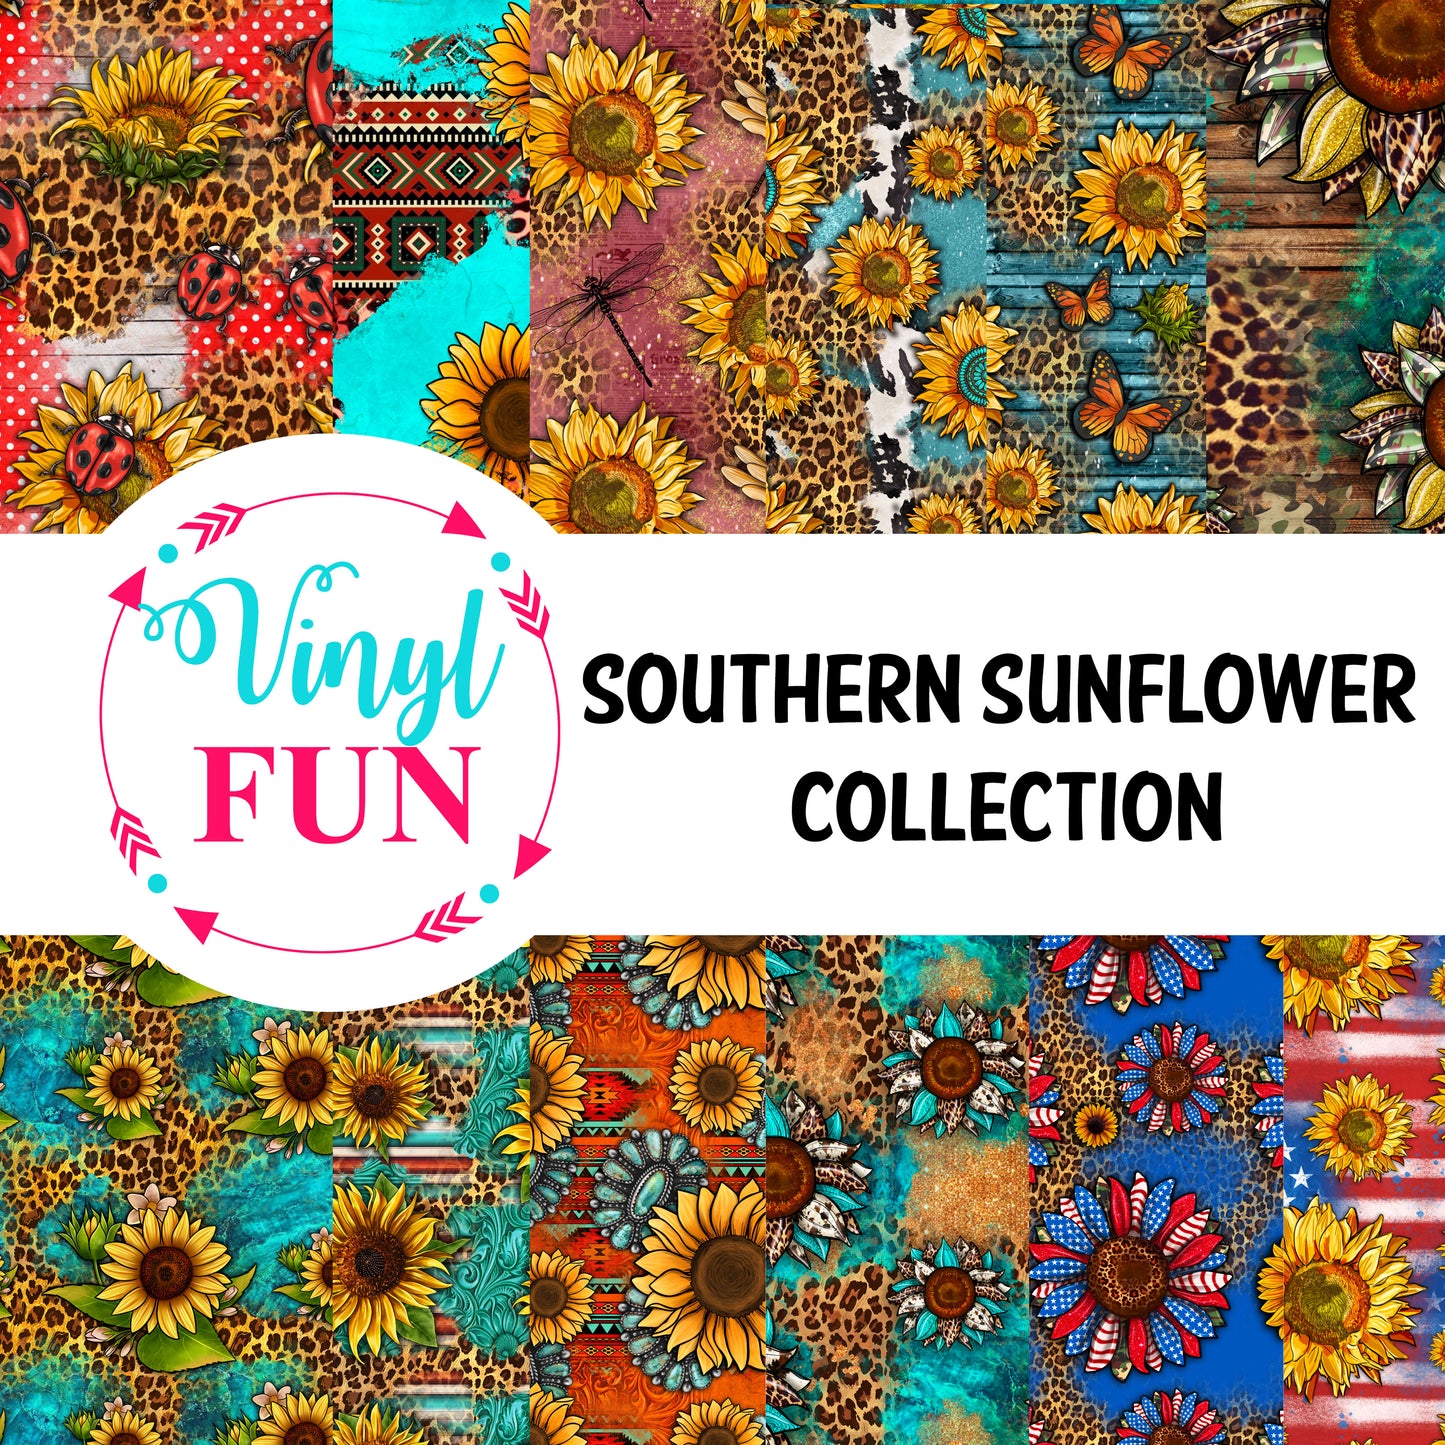 Southern Sunflower Collection